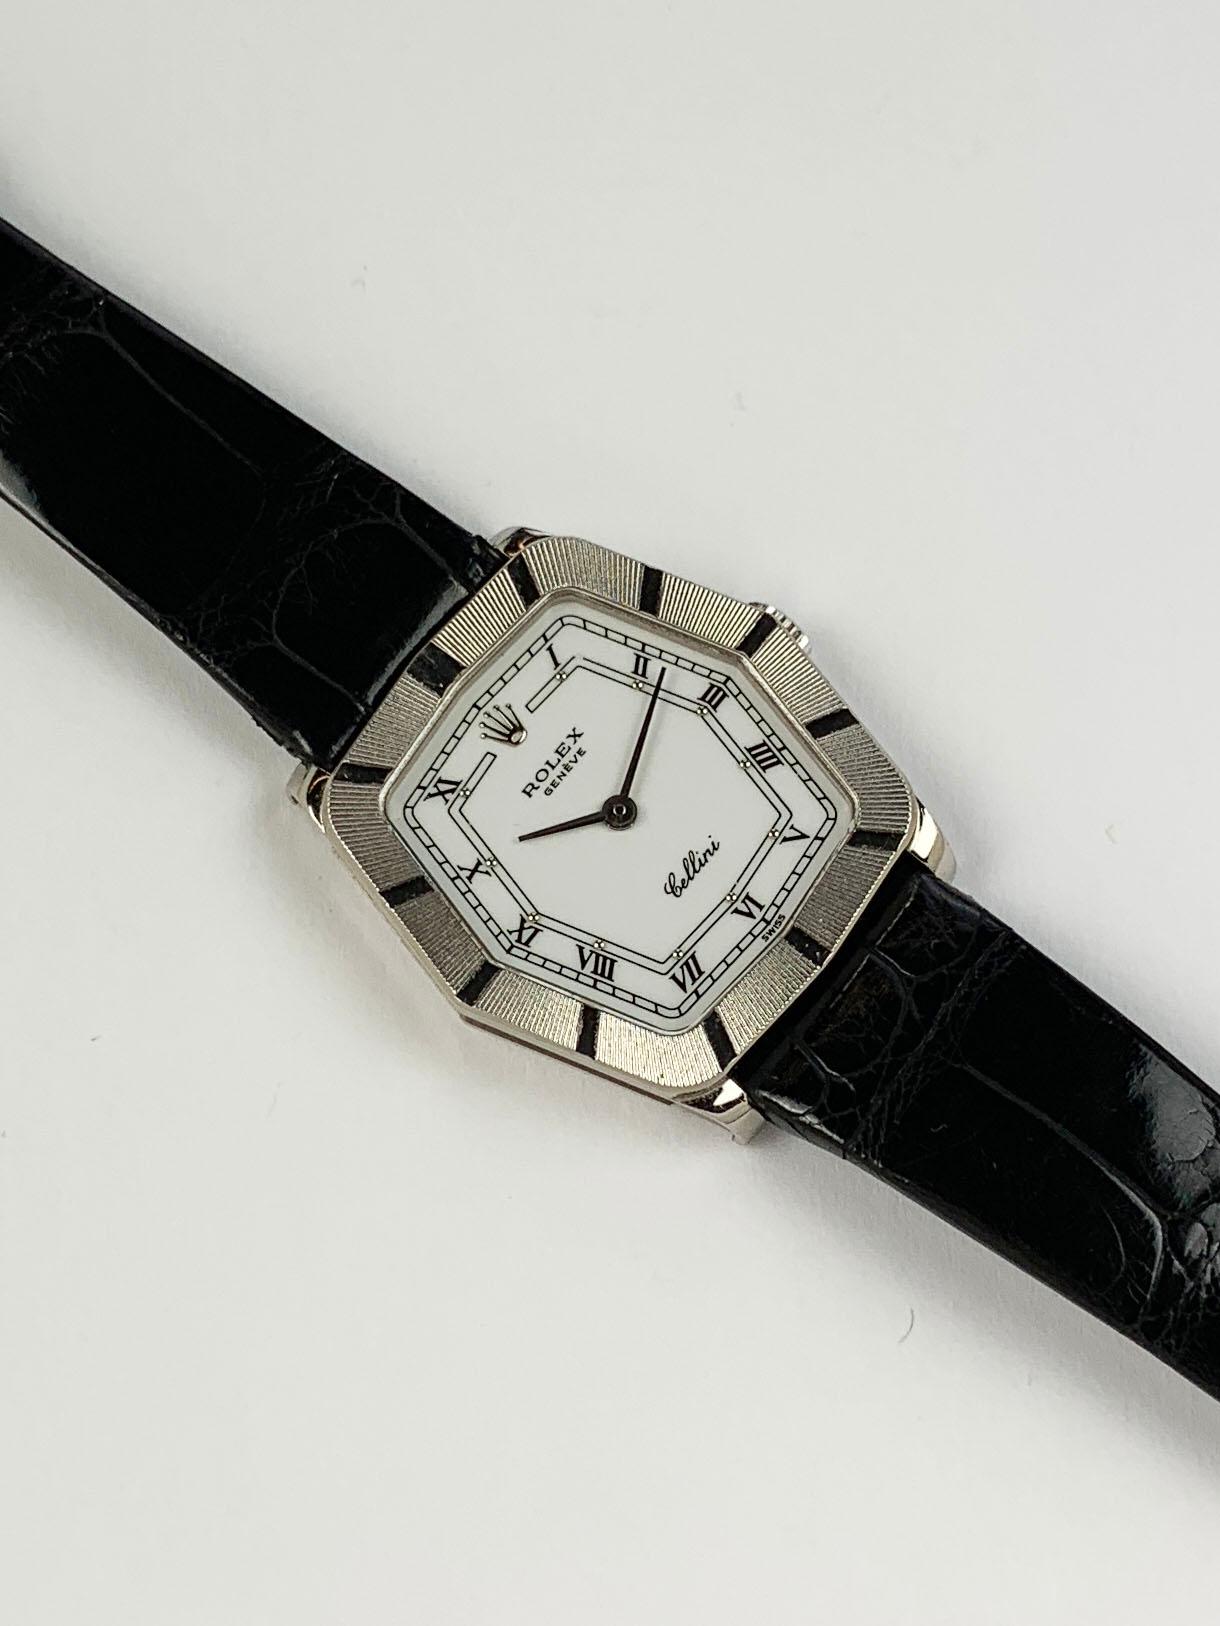 Rolex Cellini 18K White Gold Manual Wind Wristwatch
Factory White Enamel Decorated Dial with Applied Rolex Crown and Roman Numerals
Solid 18K White Gold Case 
24mm x 24mm
Rolex Manual Wind  Movement
Sapphire Crystal
1995 Production
Comes Fitted on